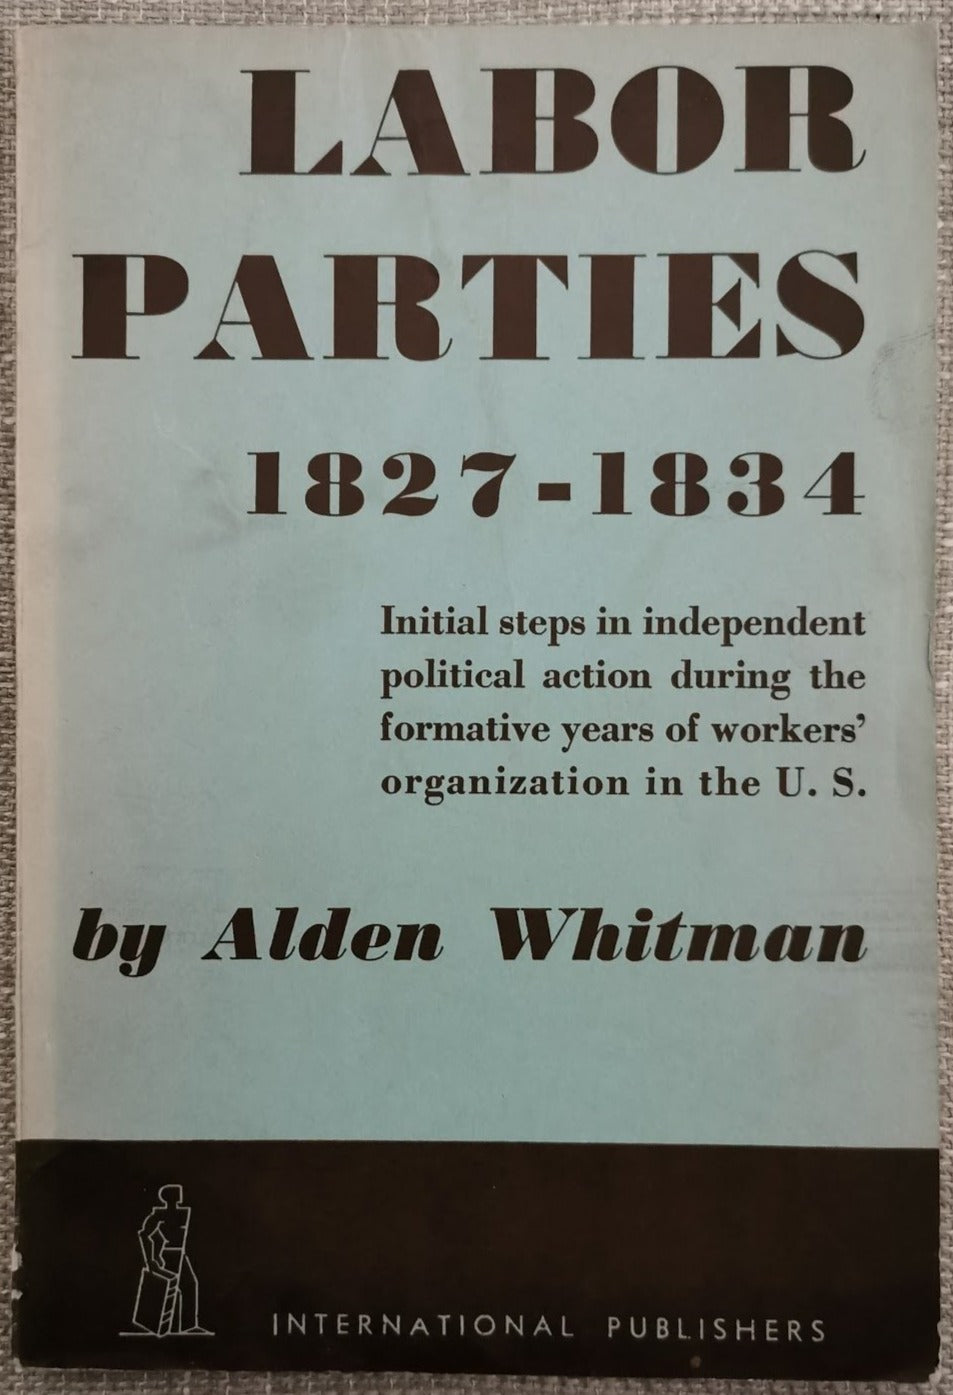 Labor Parties 1827-1834 by Alden Whitman